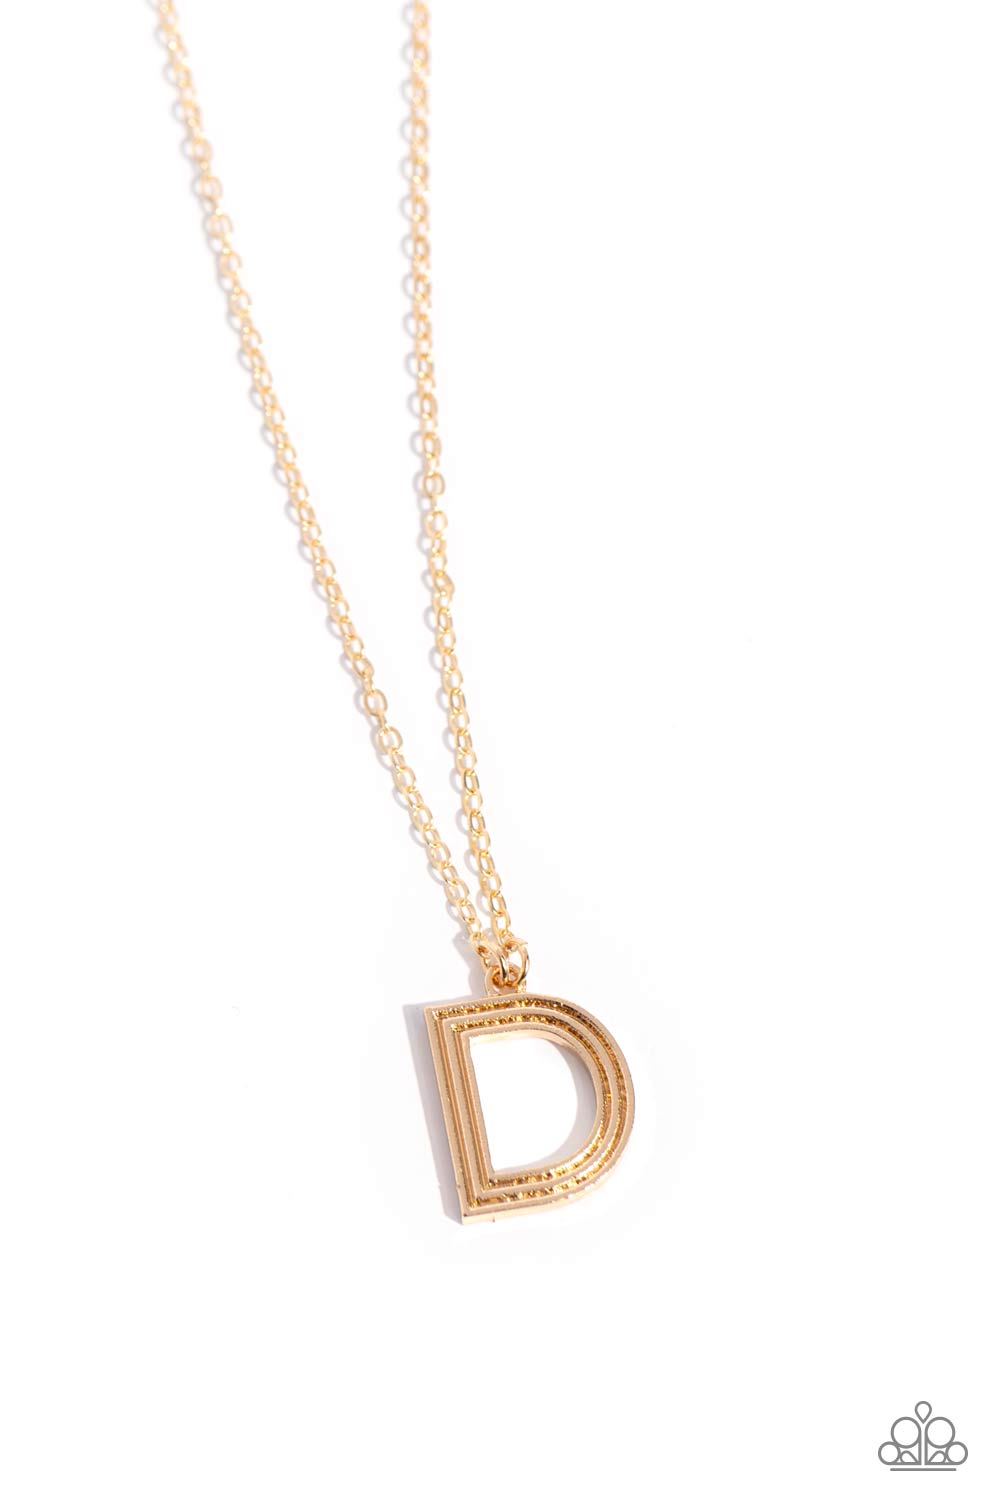 Leave Your Initials - Gold - D Necklace - Paparazzi - Dare2bdazzlin N Jewelry